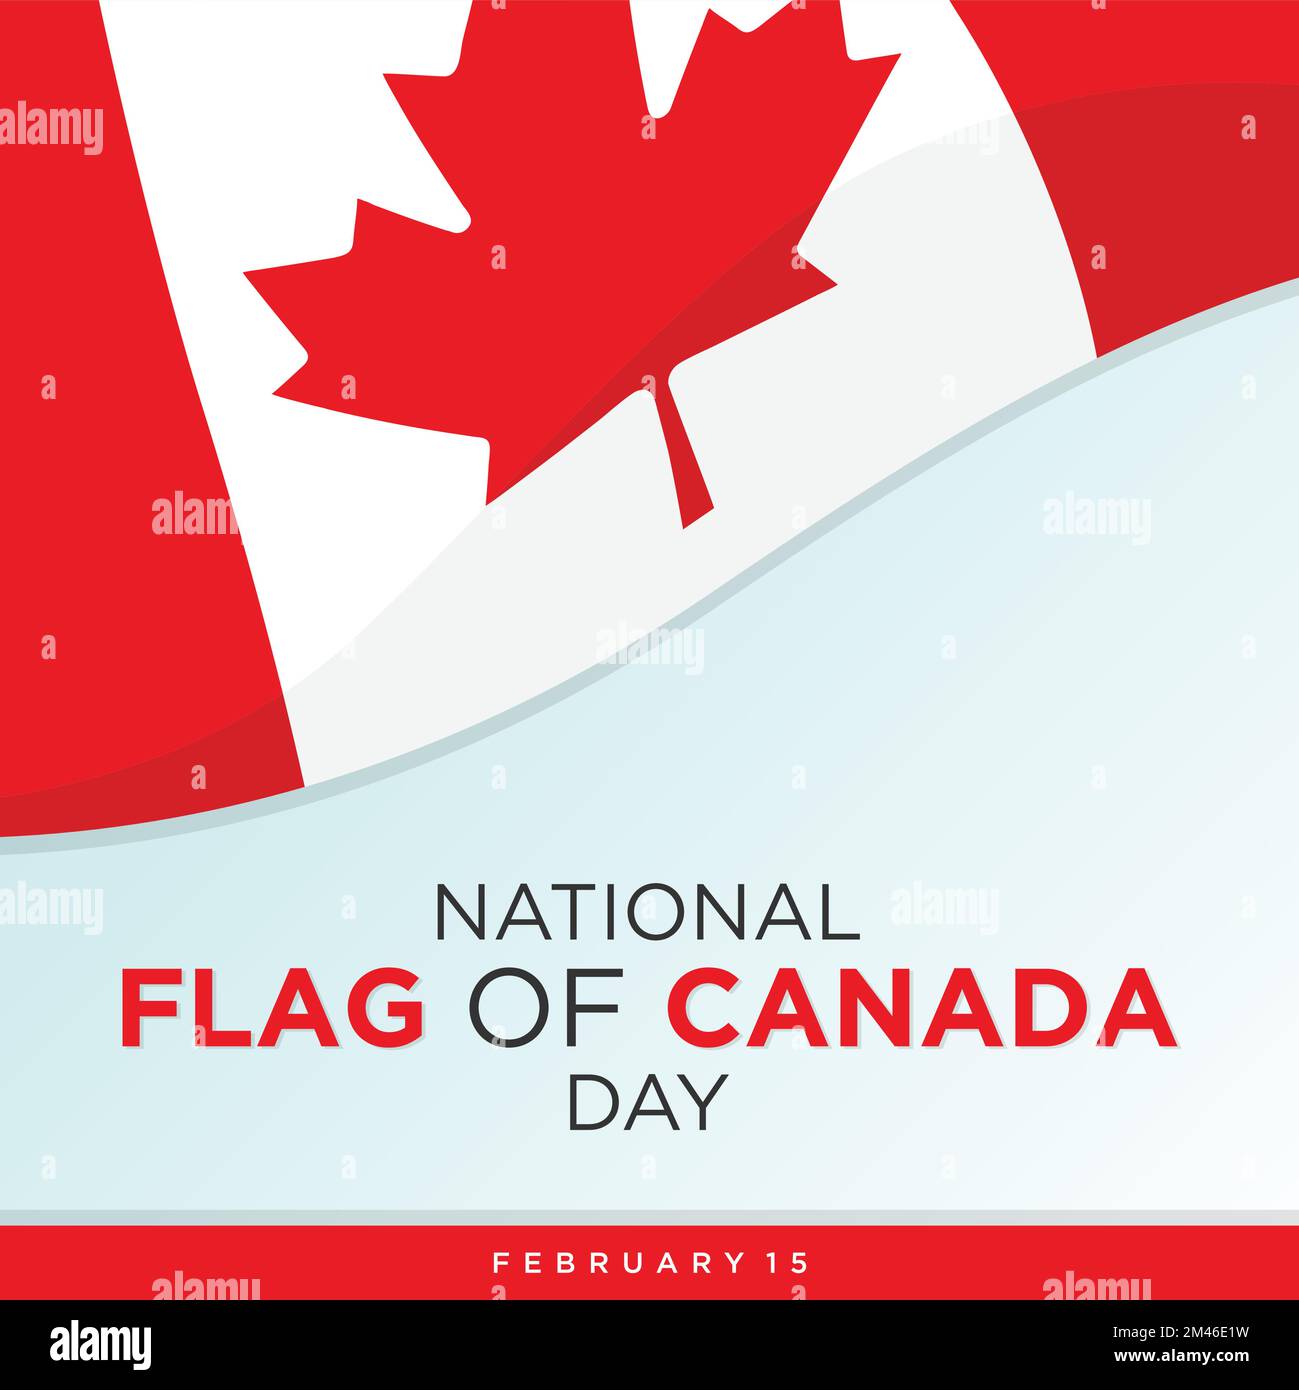 National Flag of Canada Day design template with Canadian flag